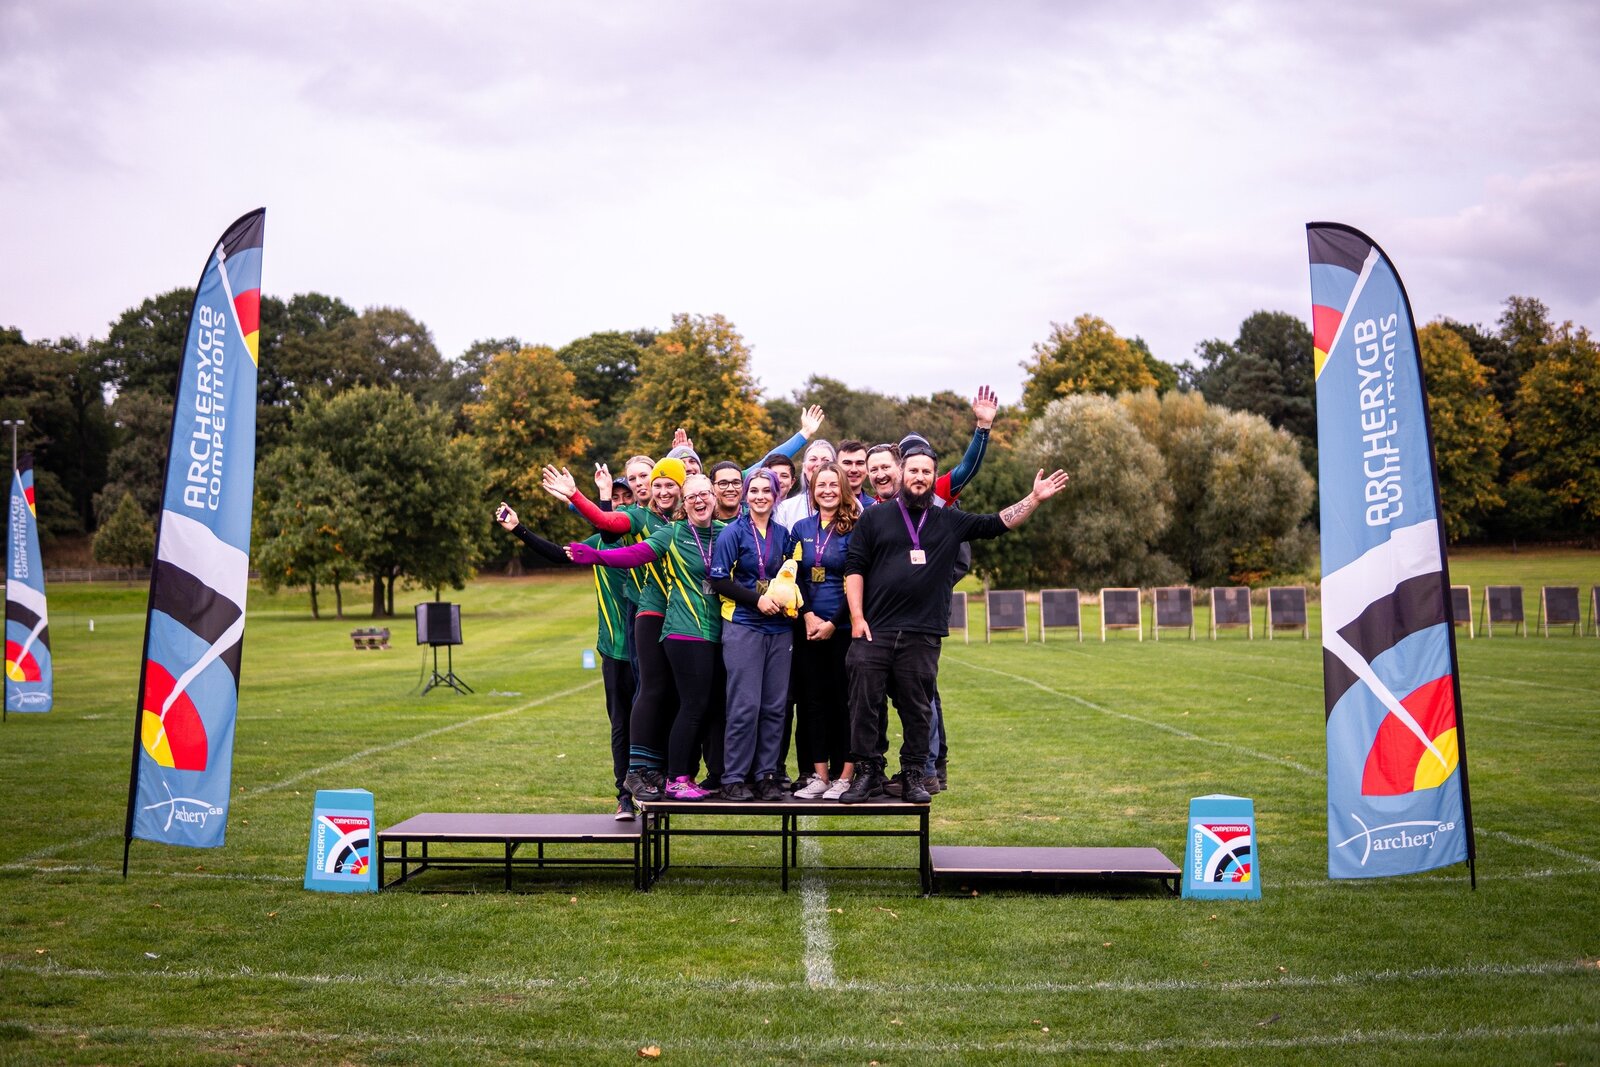 Archery GB National County Team Championships